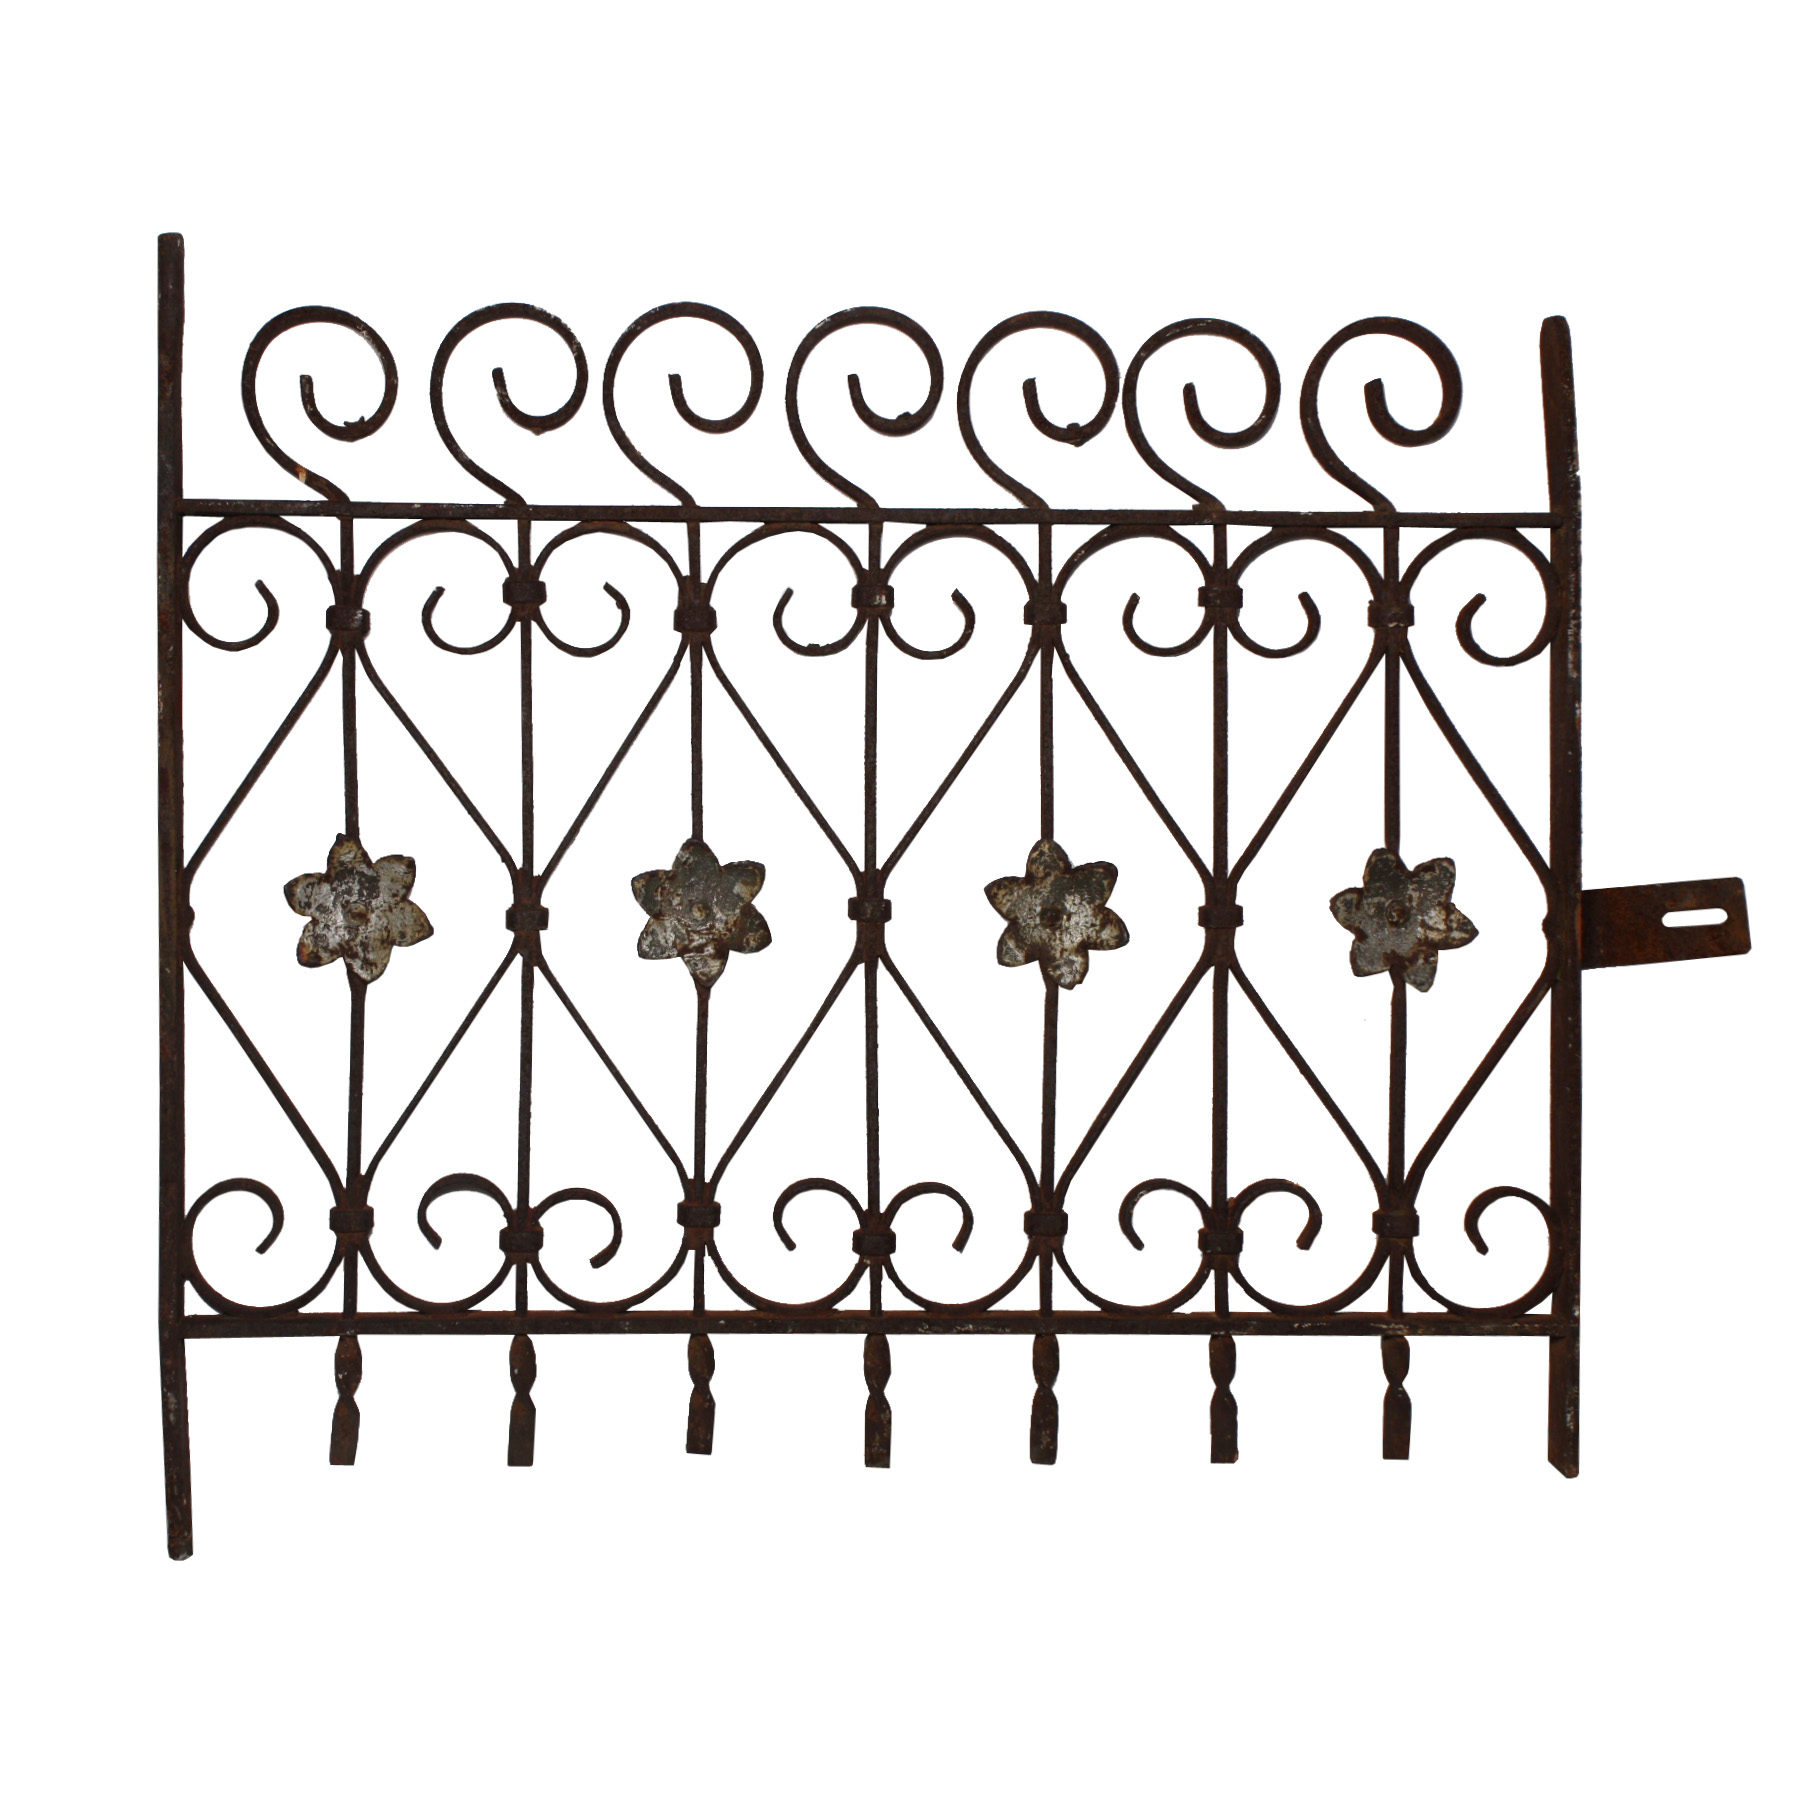 Lovely Antique Wrought Iron Window Gate, c. 1890's, NWNG35-RW For Sale ...